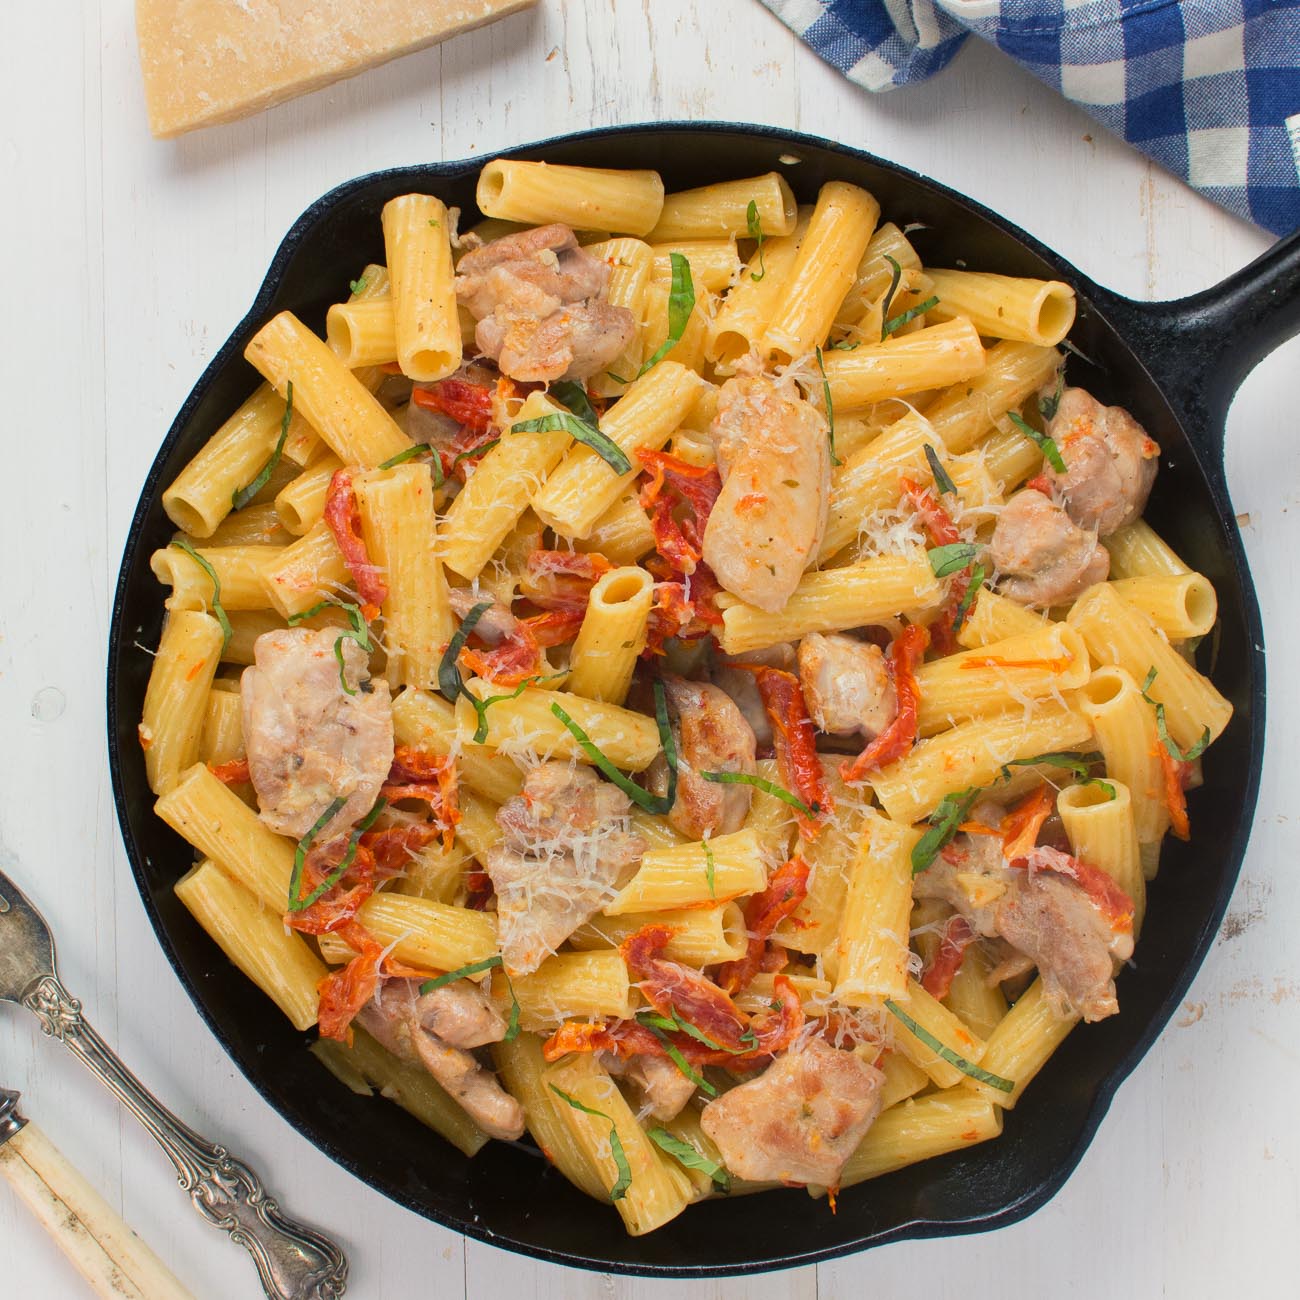 Penne with sun-dried tomato cream sauce in 30 minutes.